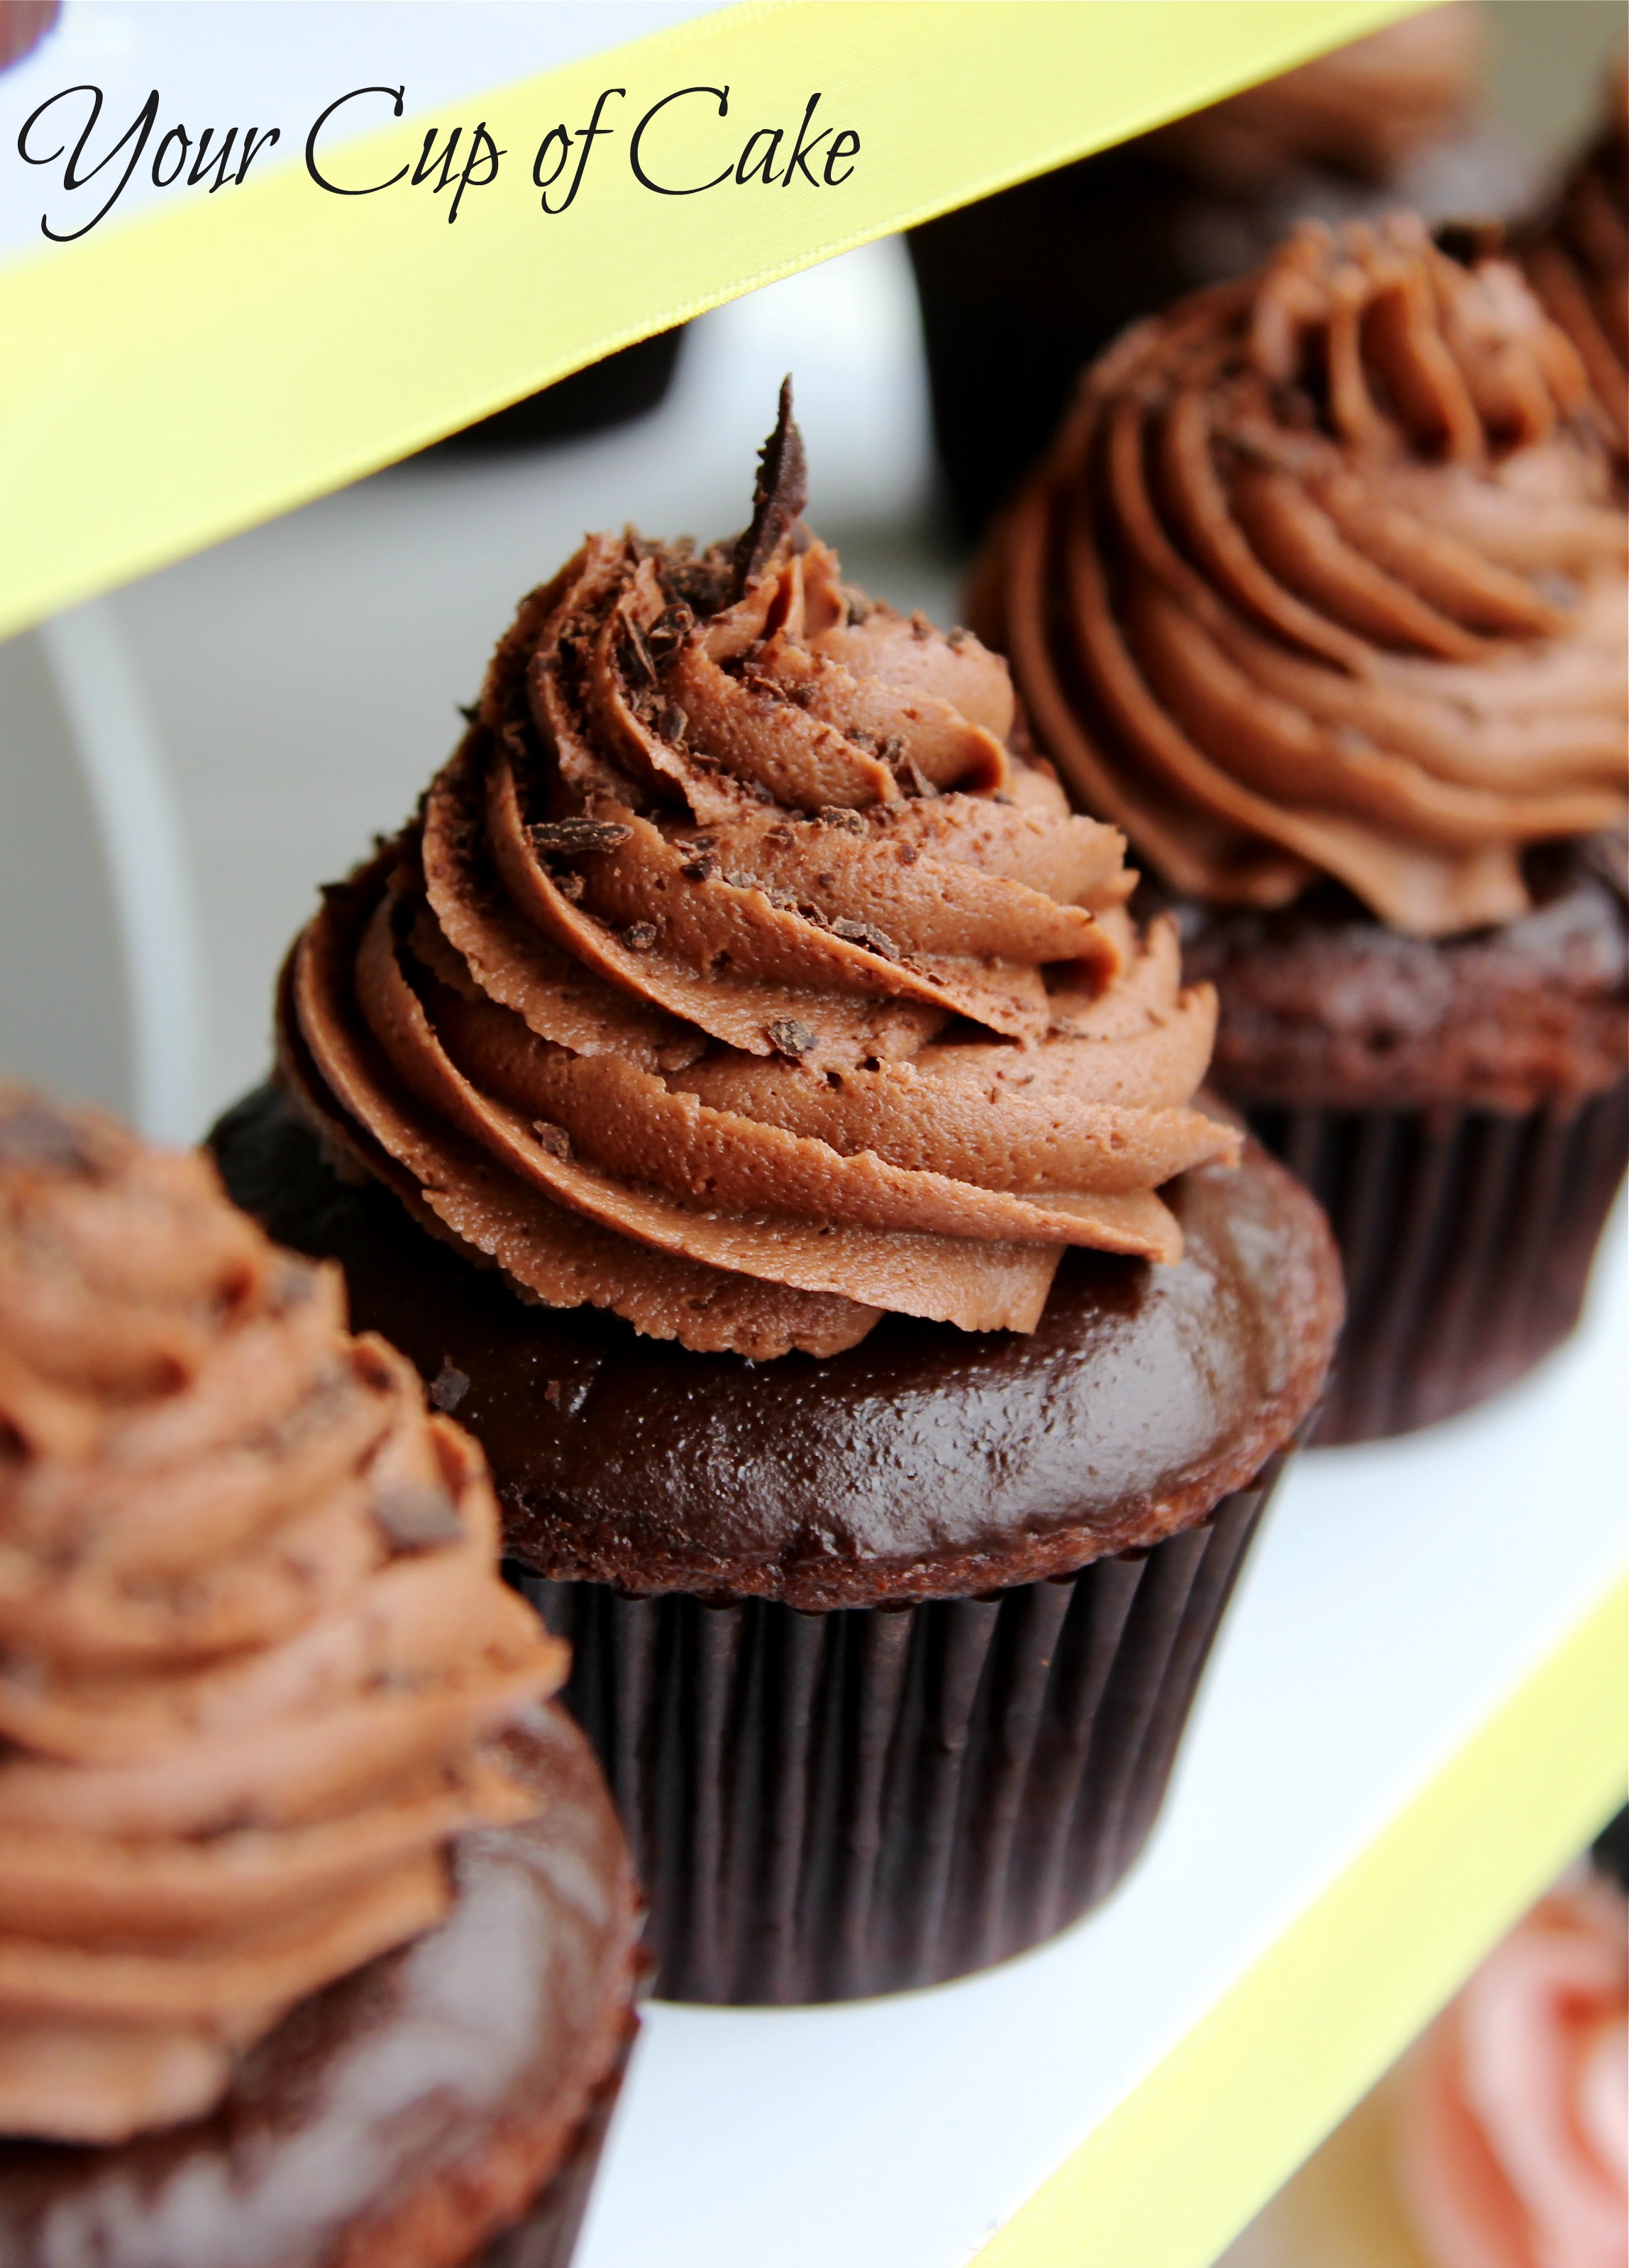 My Favorite Chocolate Cupcake - Your Cup of Cake